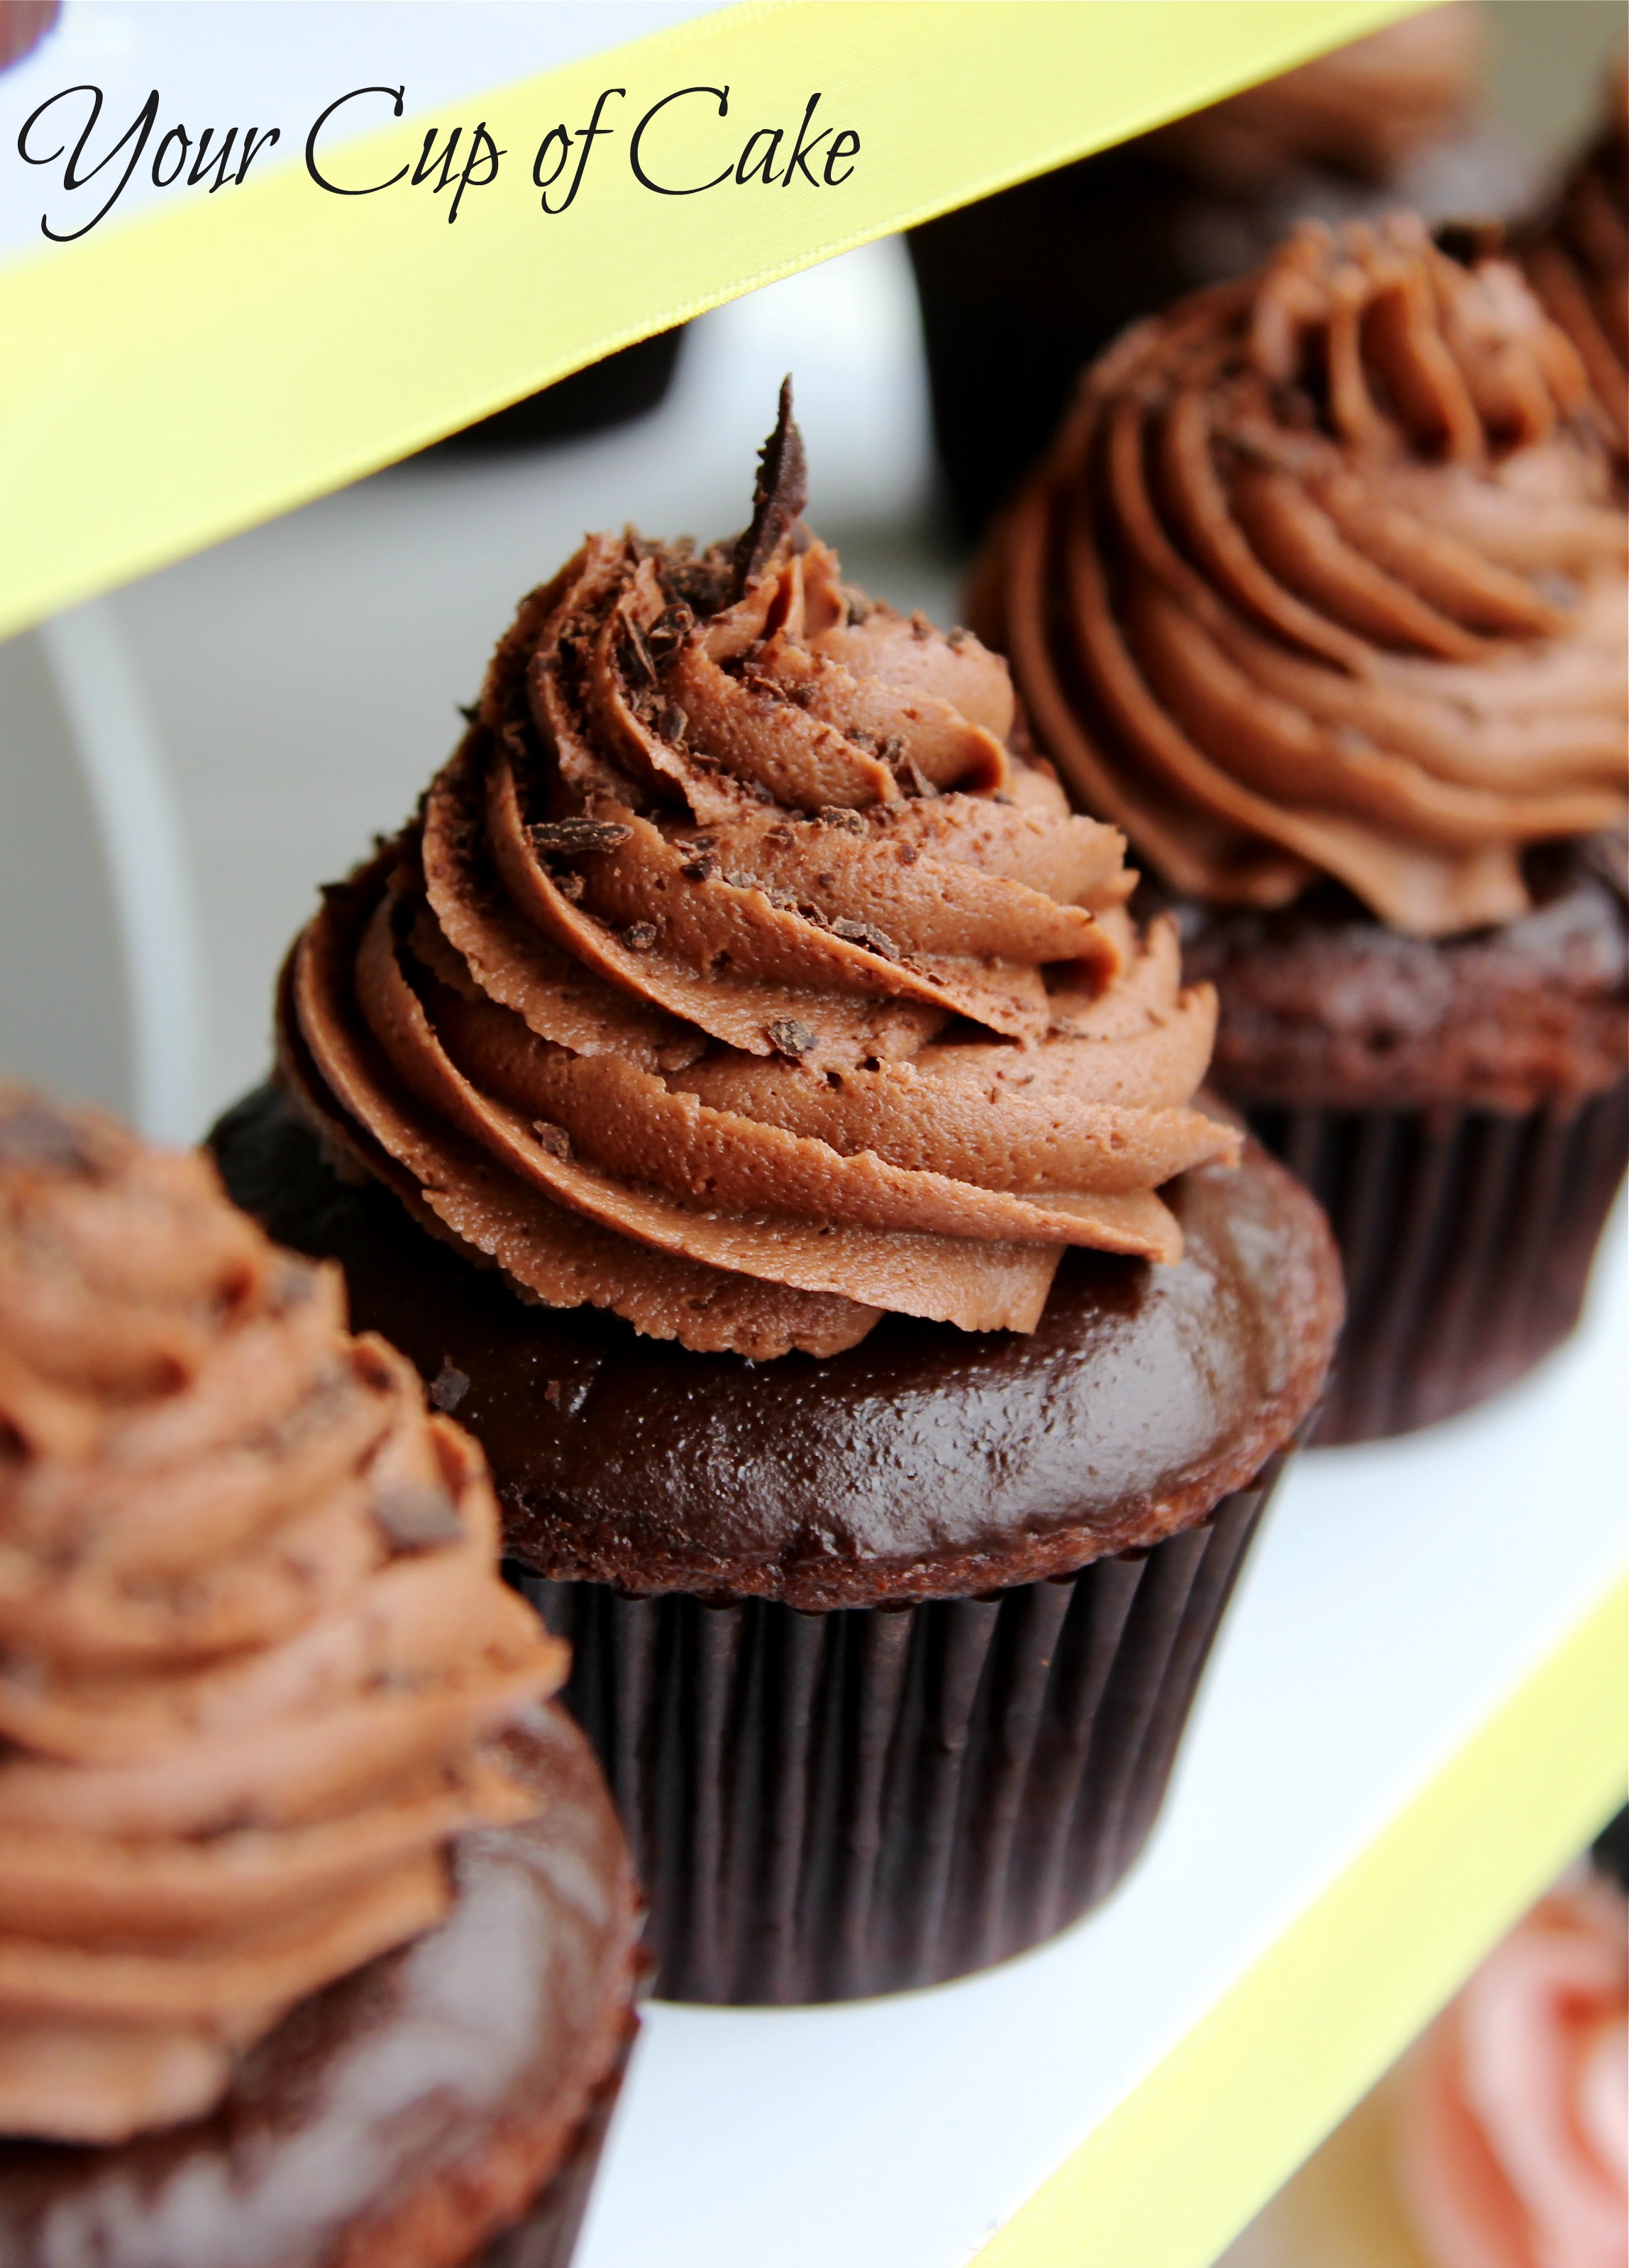 My Favorite Chocolate Cupcake - Your Cup of Cake